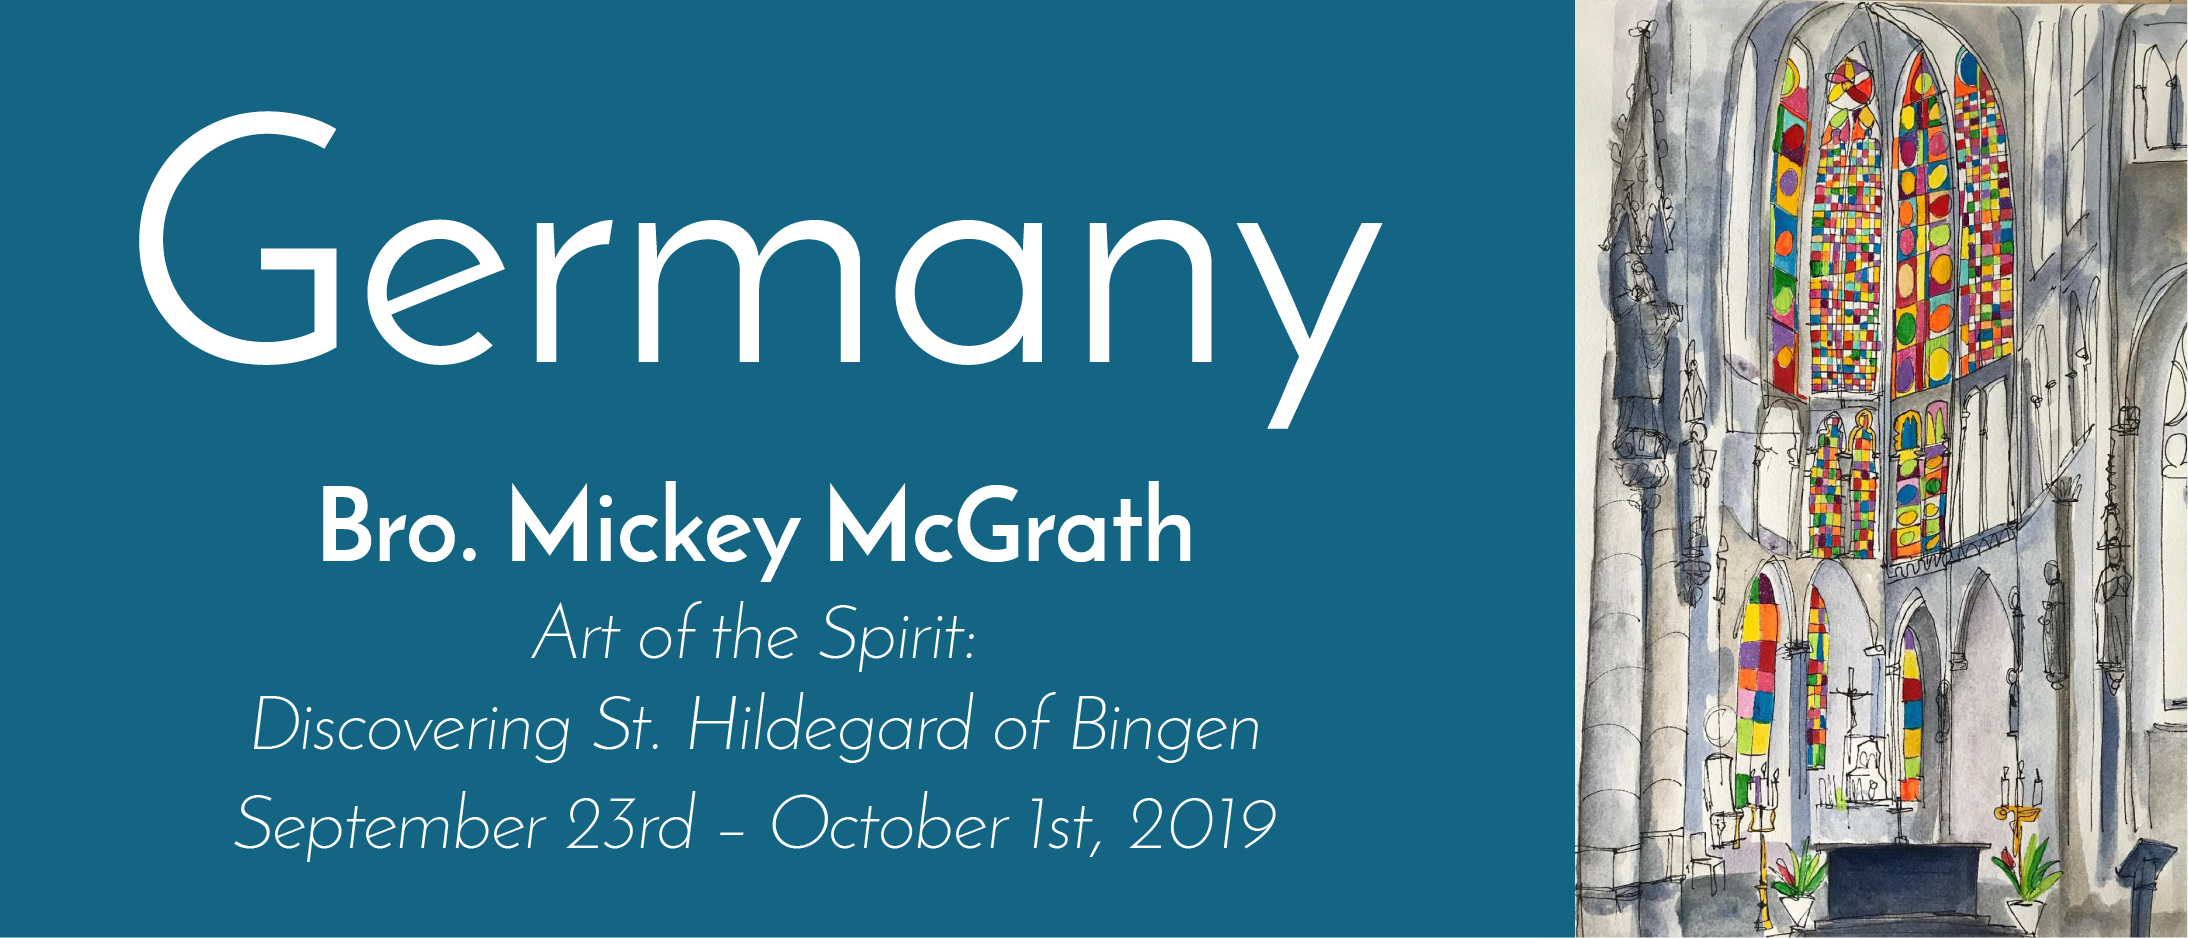 Hello to my Fellow Art and Faith Pilgrims! After considering several other exciting options for our 2019 Art and Faith Journey with Bro. Mickey Tour, Dave Geen and I have landed on Germany- and I can’t wait to tell you about it.